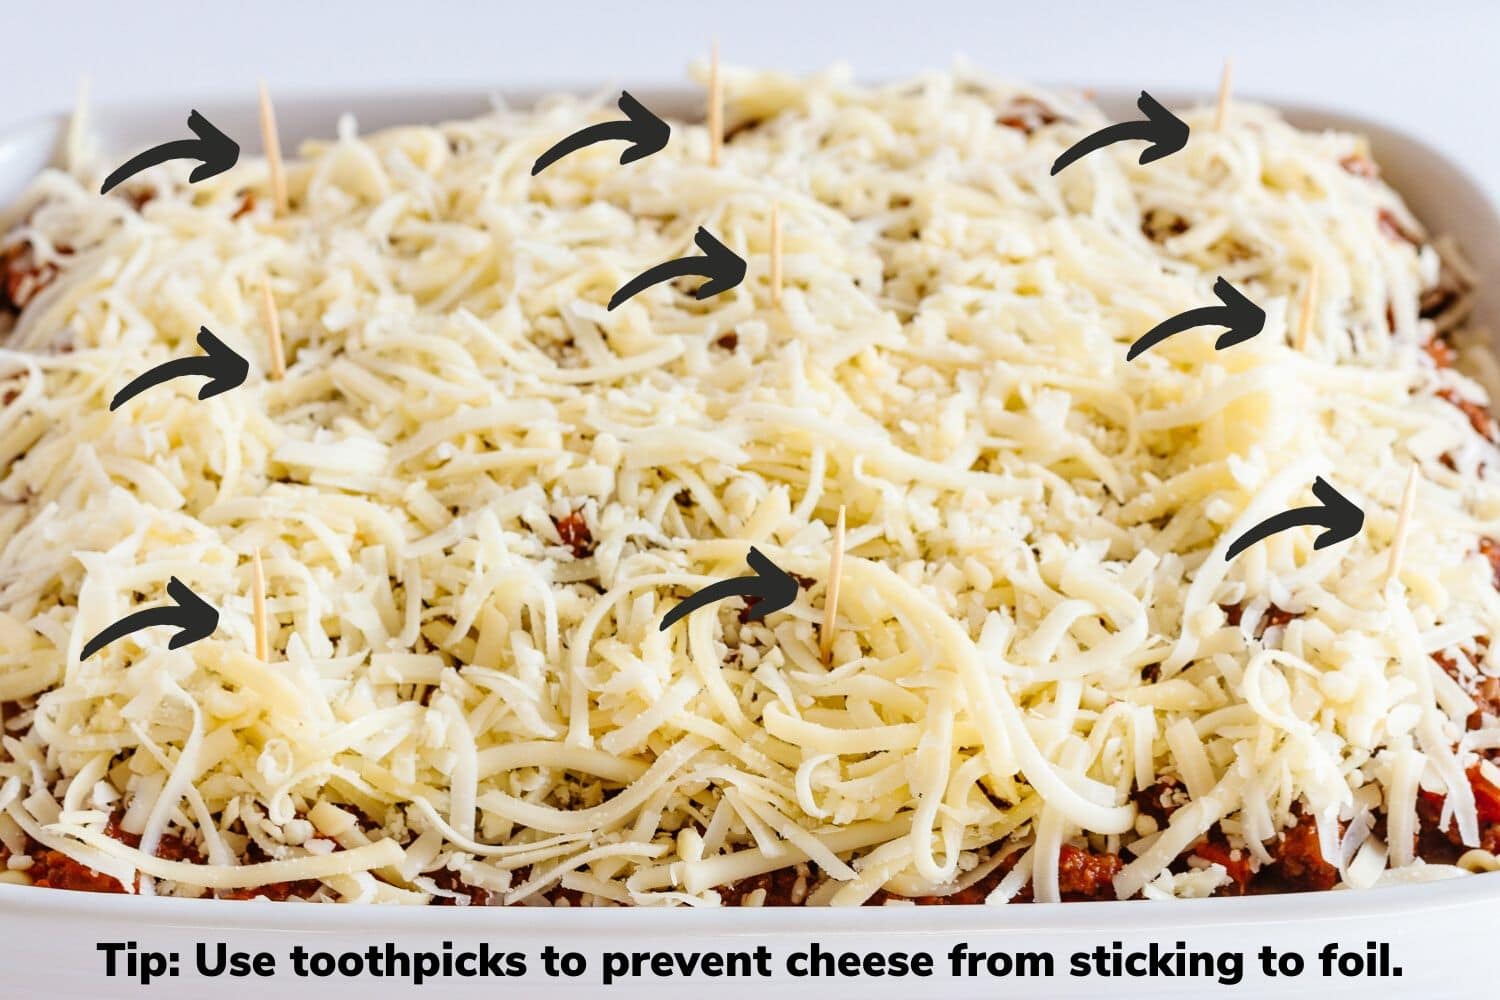 Photo diagram showing toothpicks placed in lasagna in order to prevent cheese from sticking to foil.